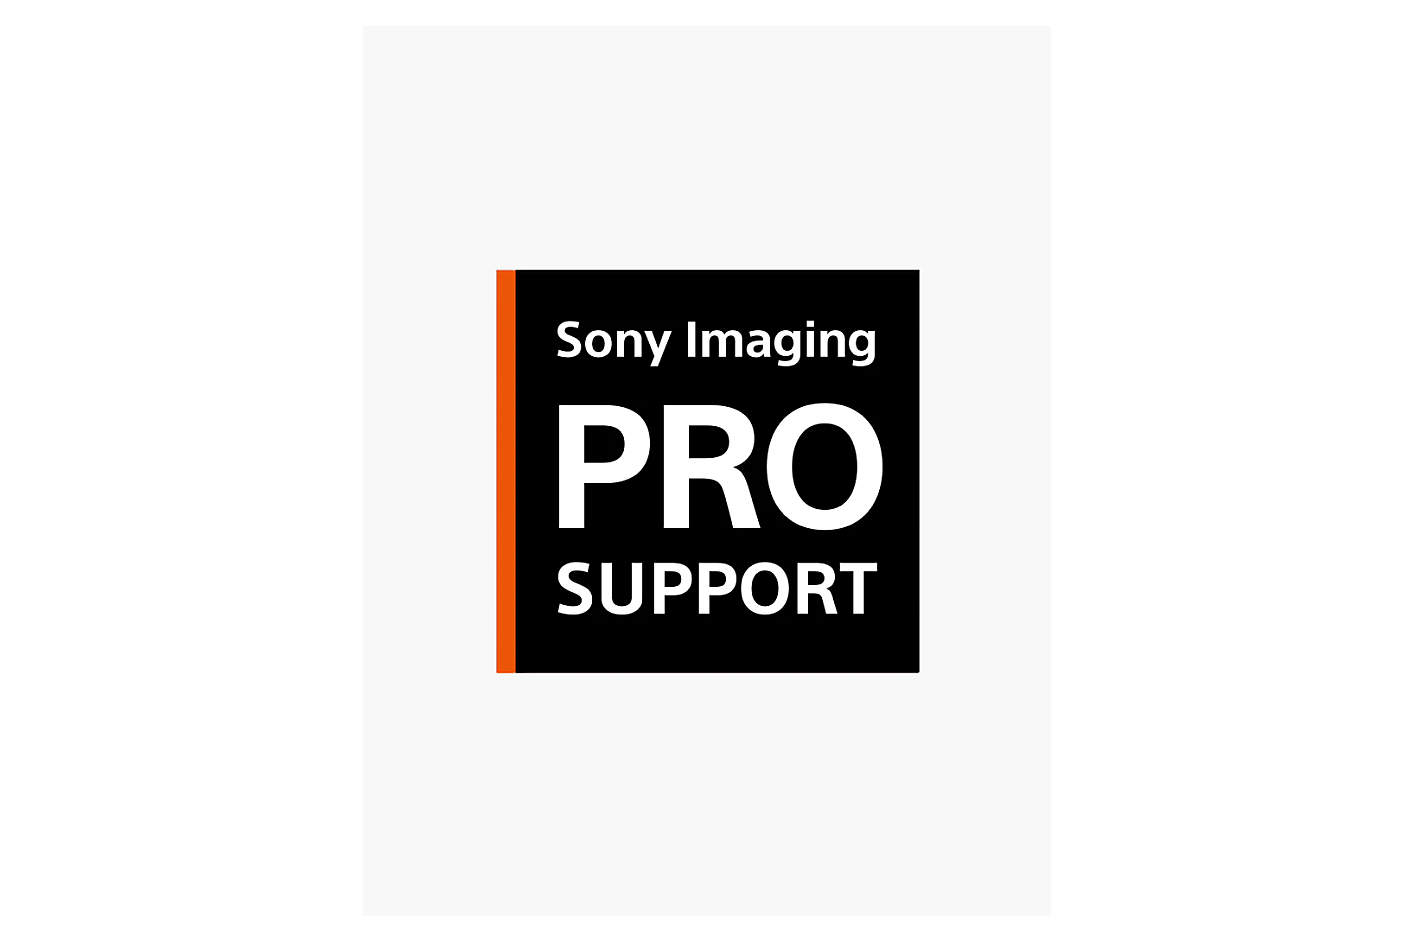 Sony Imaging Pro Support logo